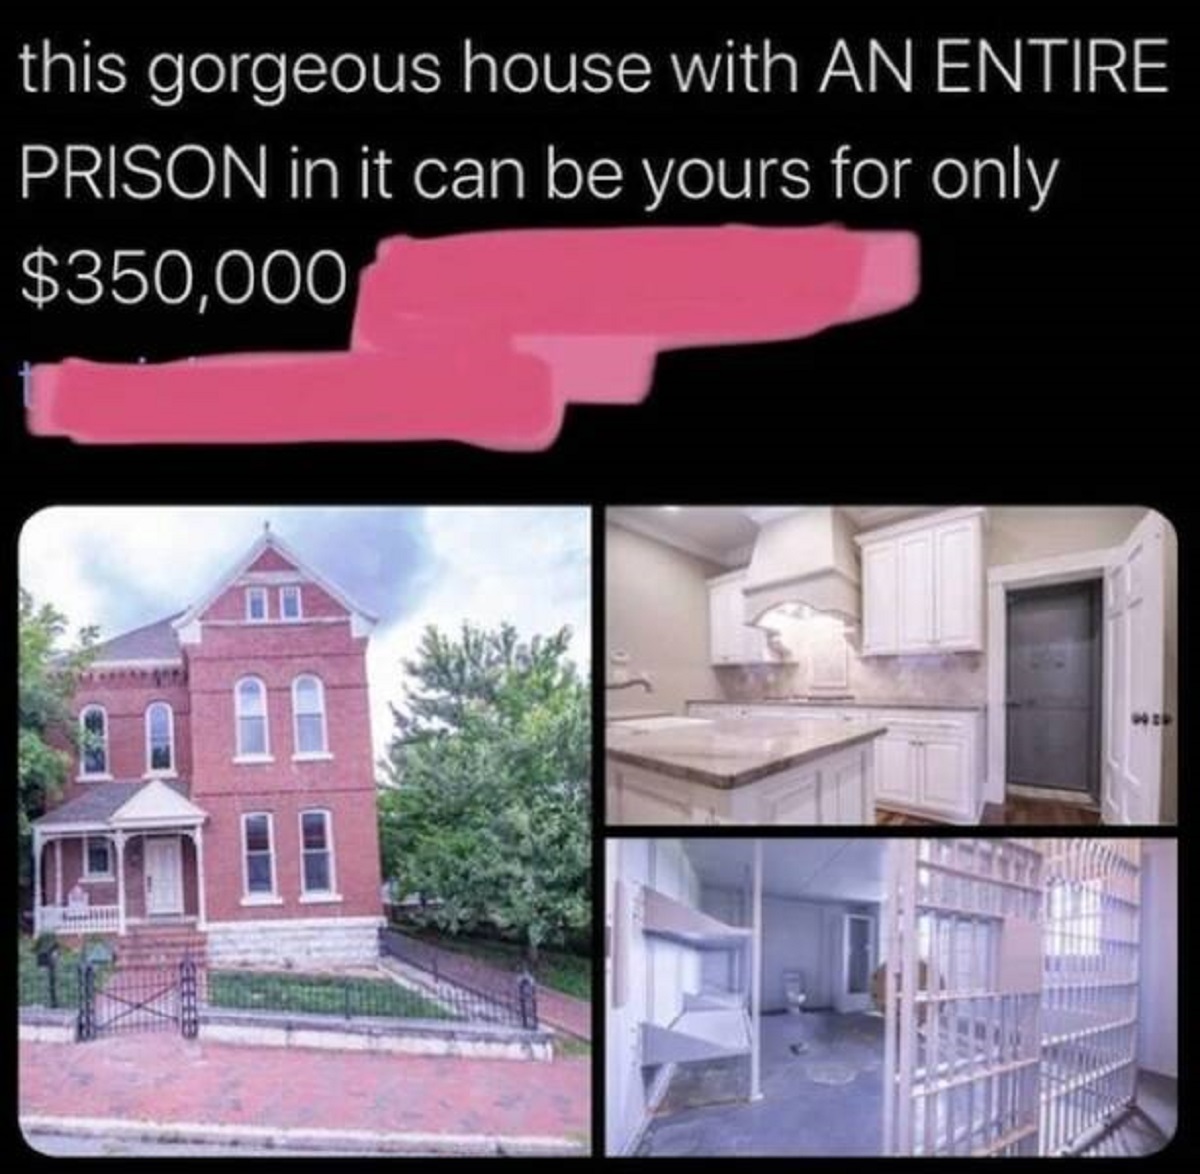 house - this gorgeous house with An Entire Prison in it can be yours for only $350,000